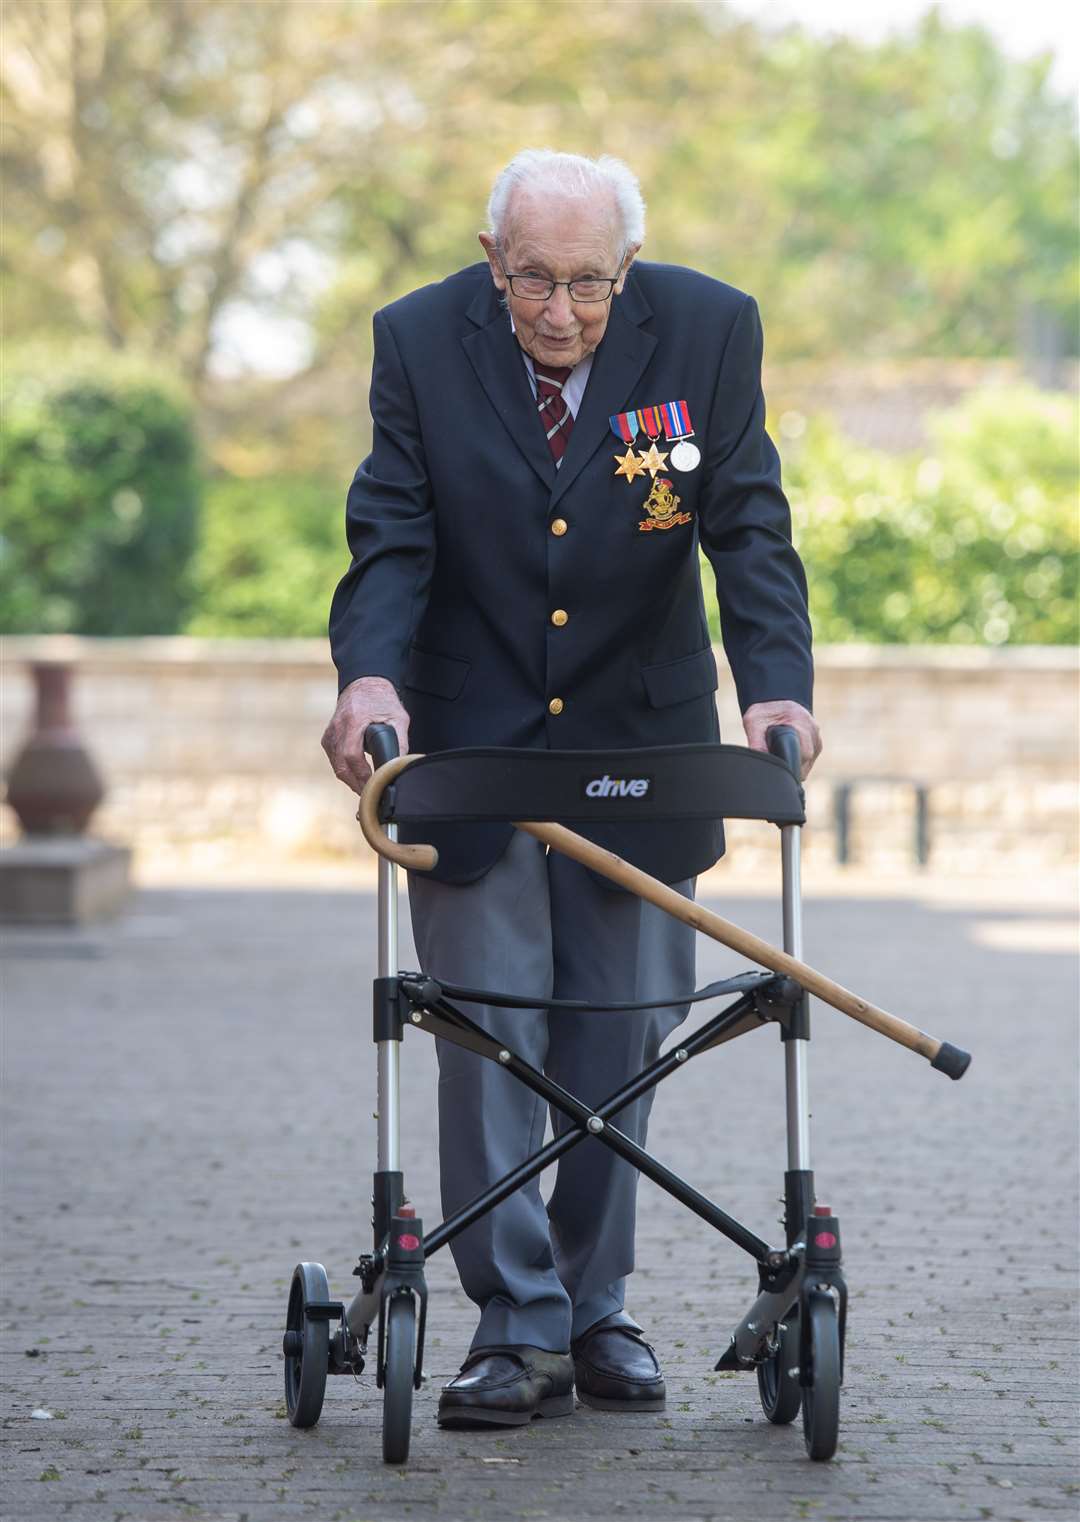 Captain Tom Moore, 99, has raised more than £13m for the NHS by walking 100 laps of his garden (Joe Giddens/PA)